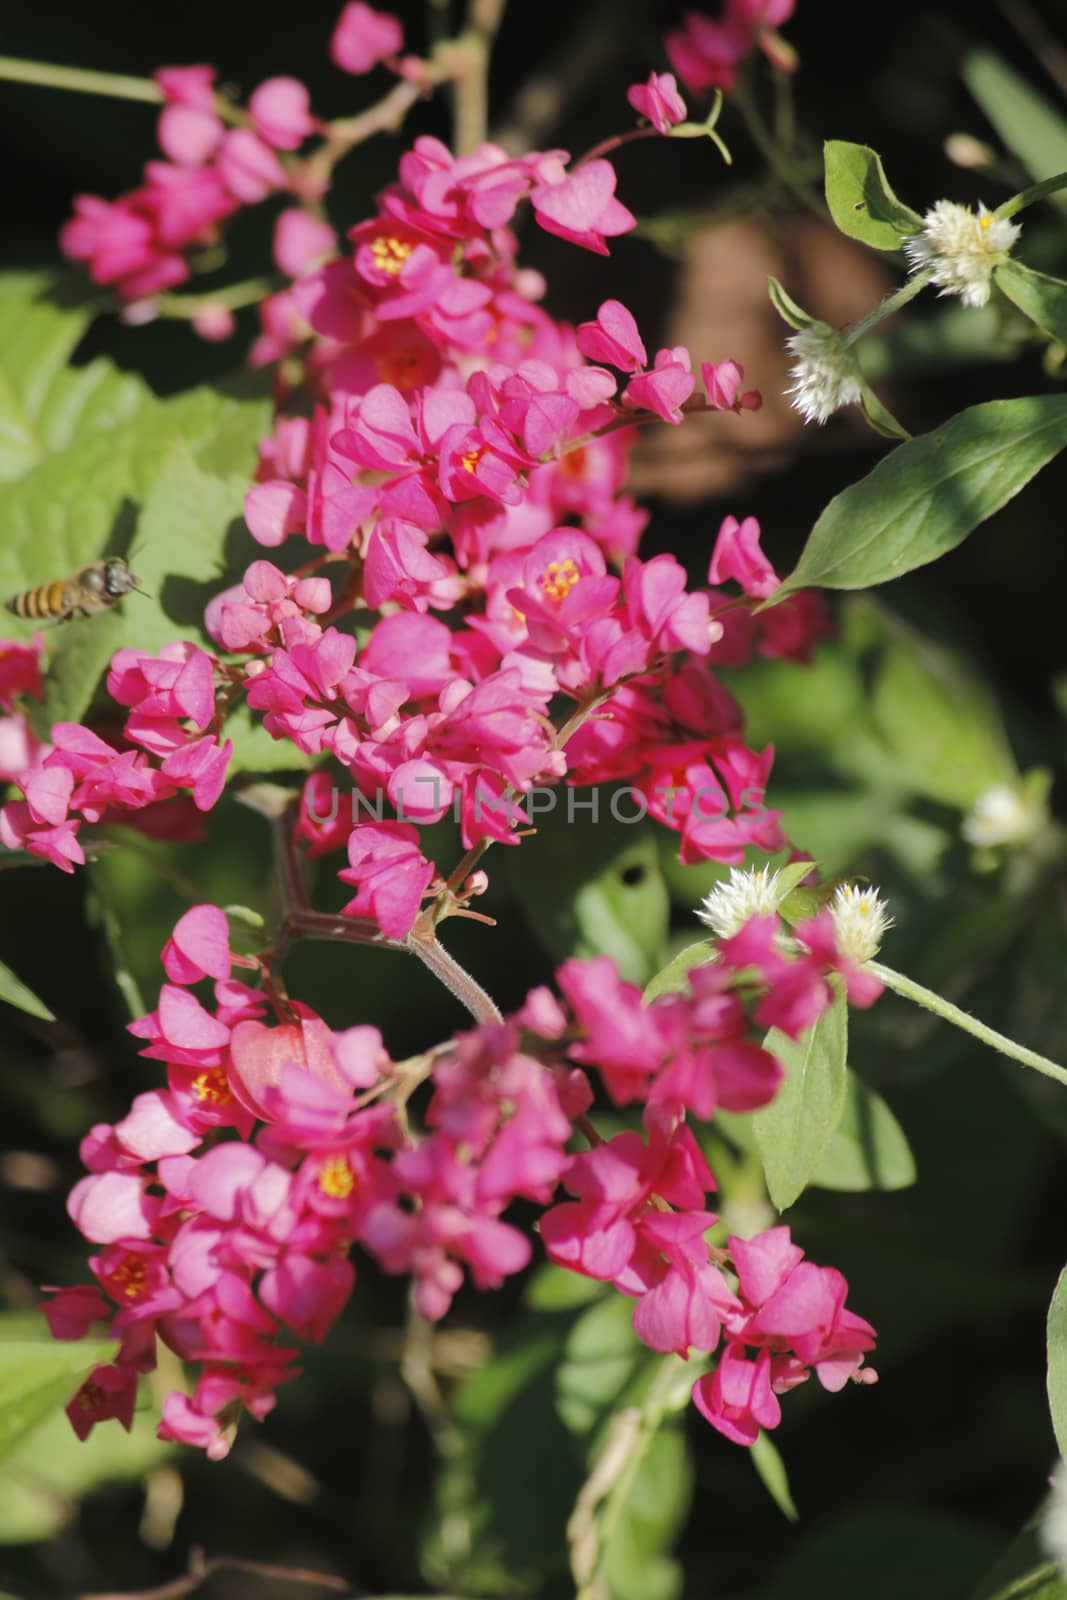 Antigonon leptopus, commonly known as Mexican Creeper, coral vine, bee bush or San Miguelito Vine, is a species of flowering plant in the buckwheat family, Polygonaceae